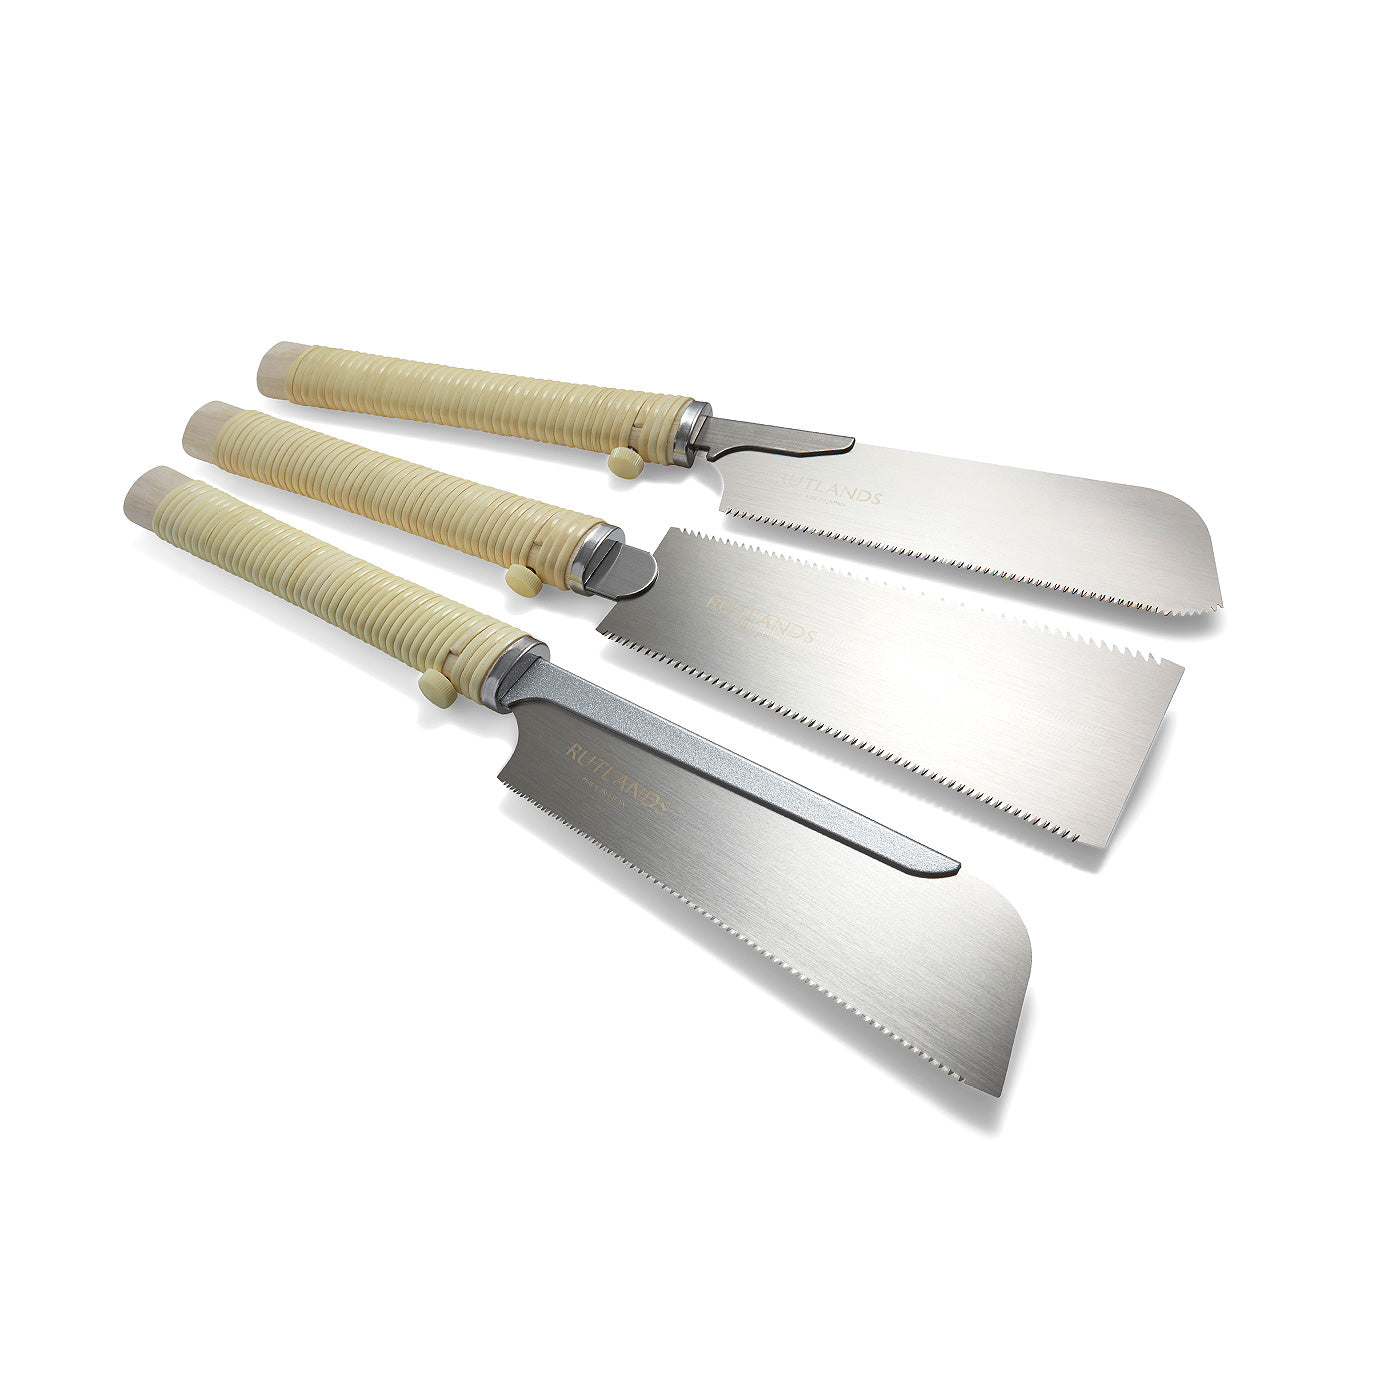 Japanese Saws - 180mm - Rattan - Set of 3 with Roll